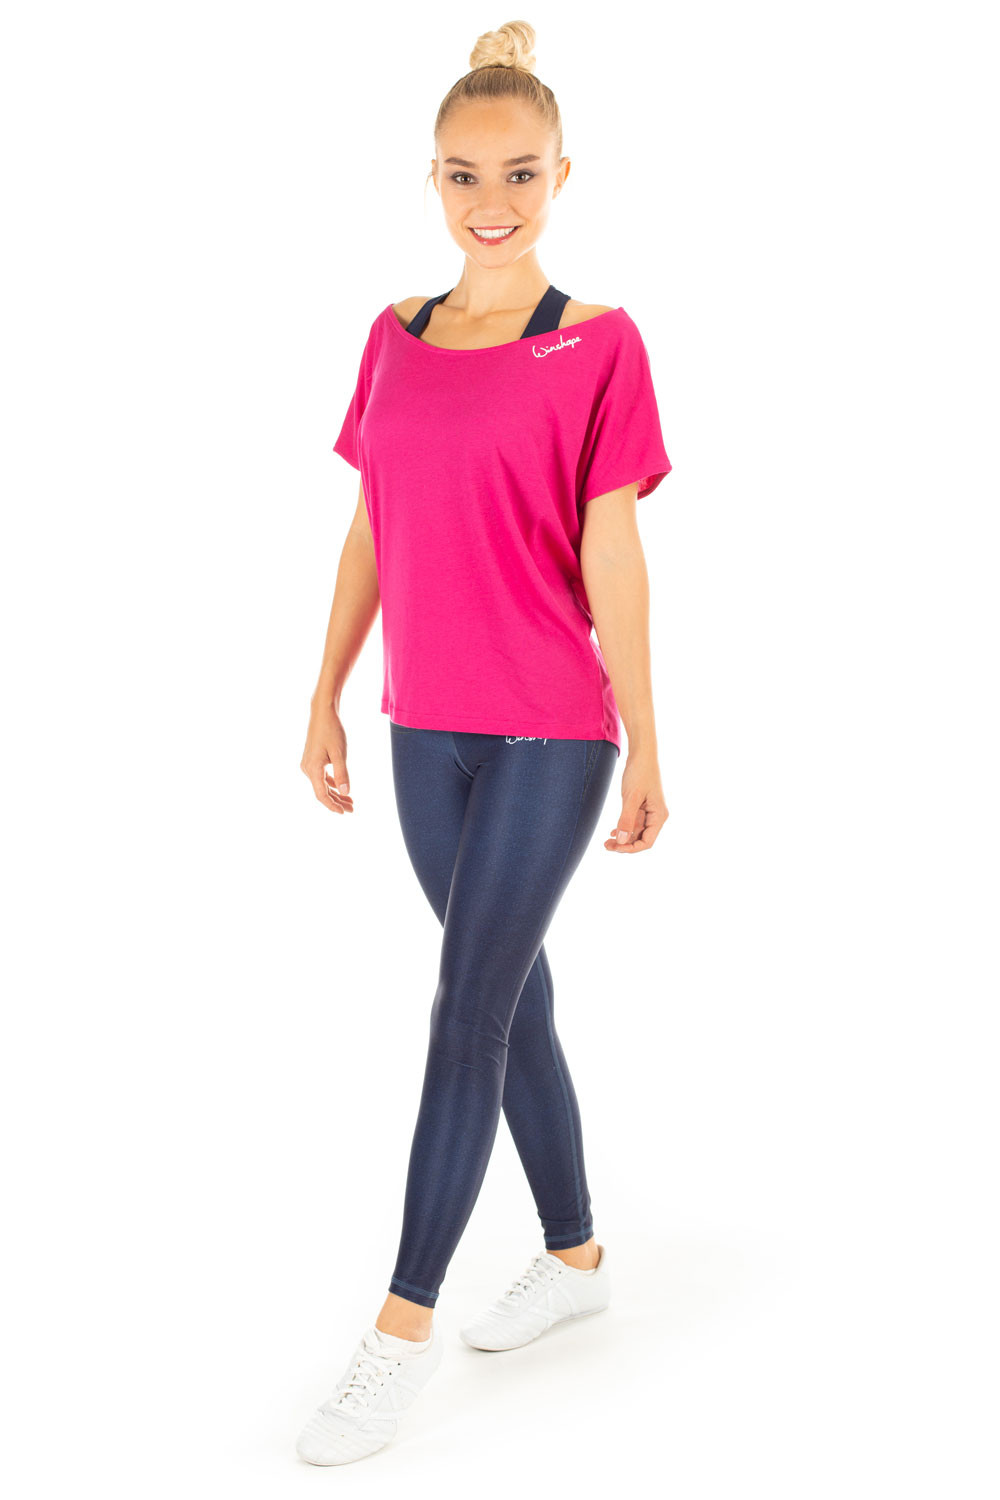 Winshape Jeans Shape Slim blue, Style Functional rich “Bootylicious”AEL102, Tights Power